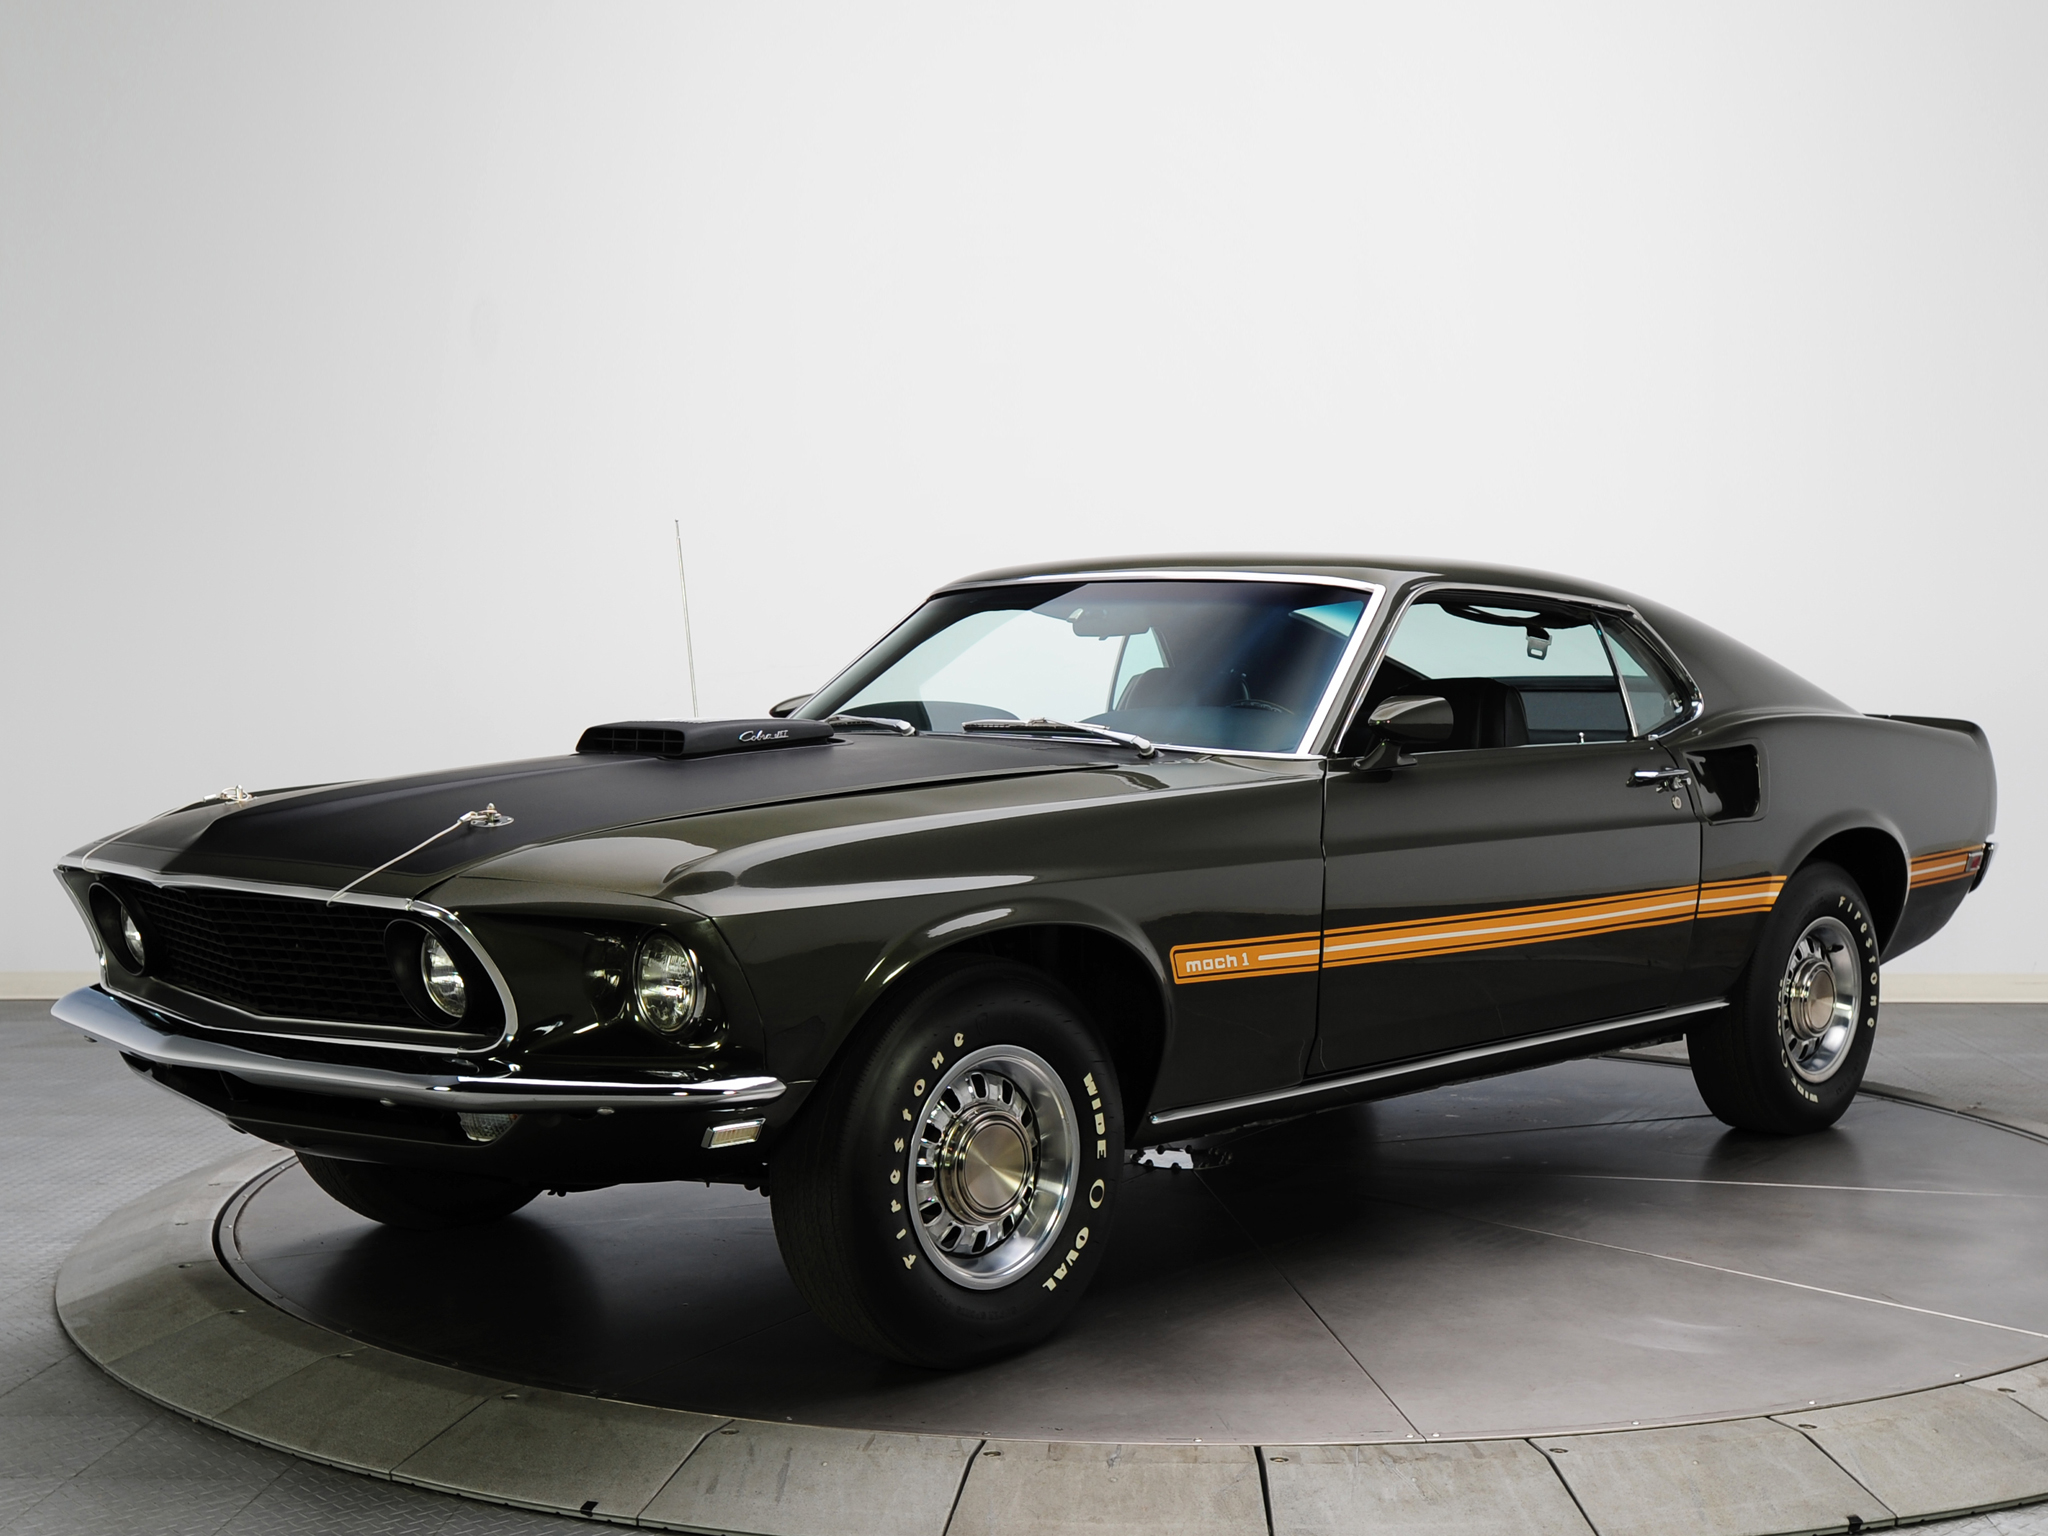 Ford Mustang, le vra